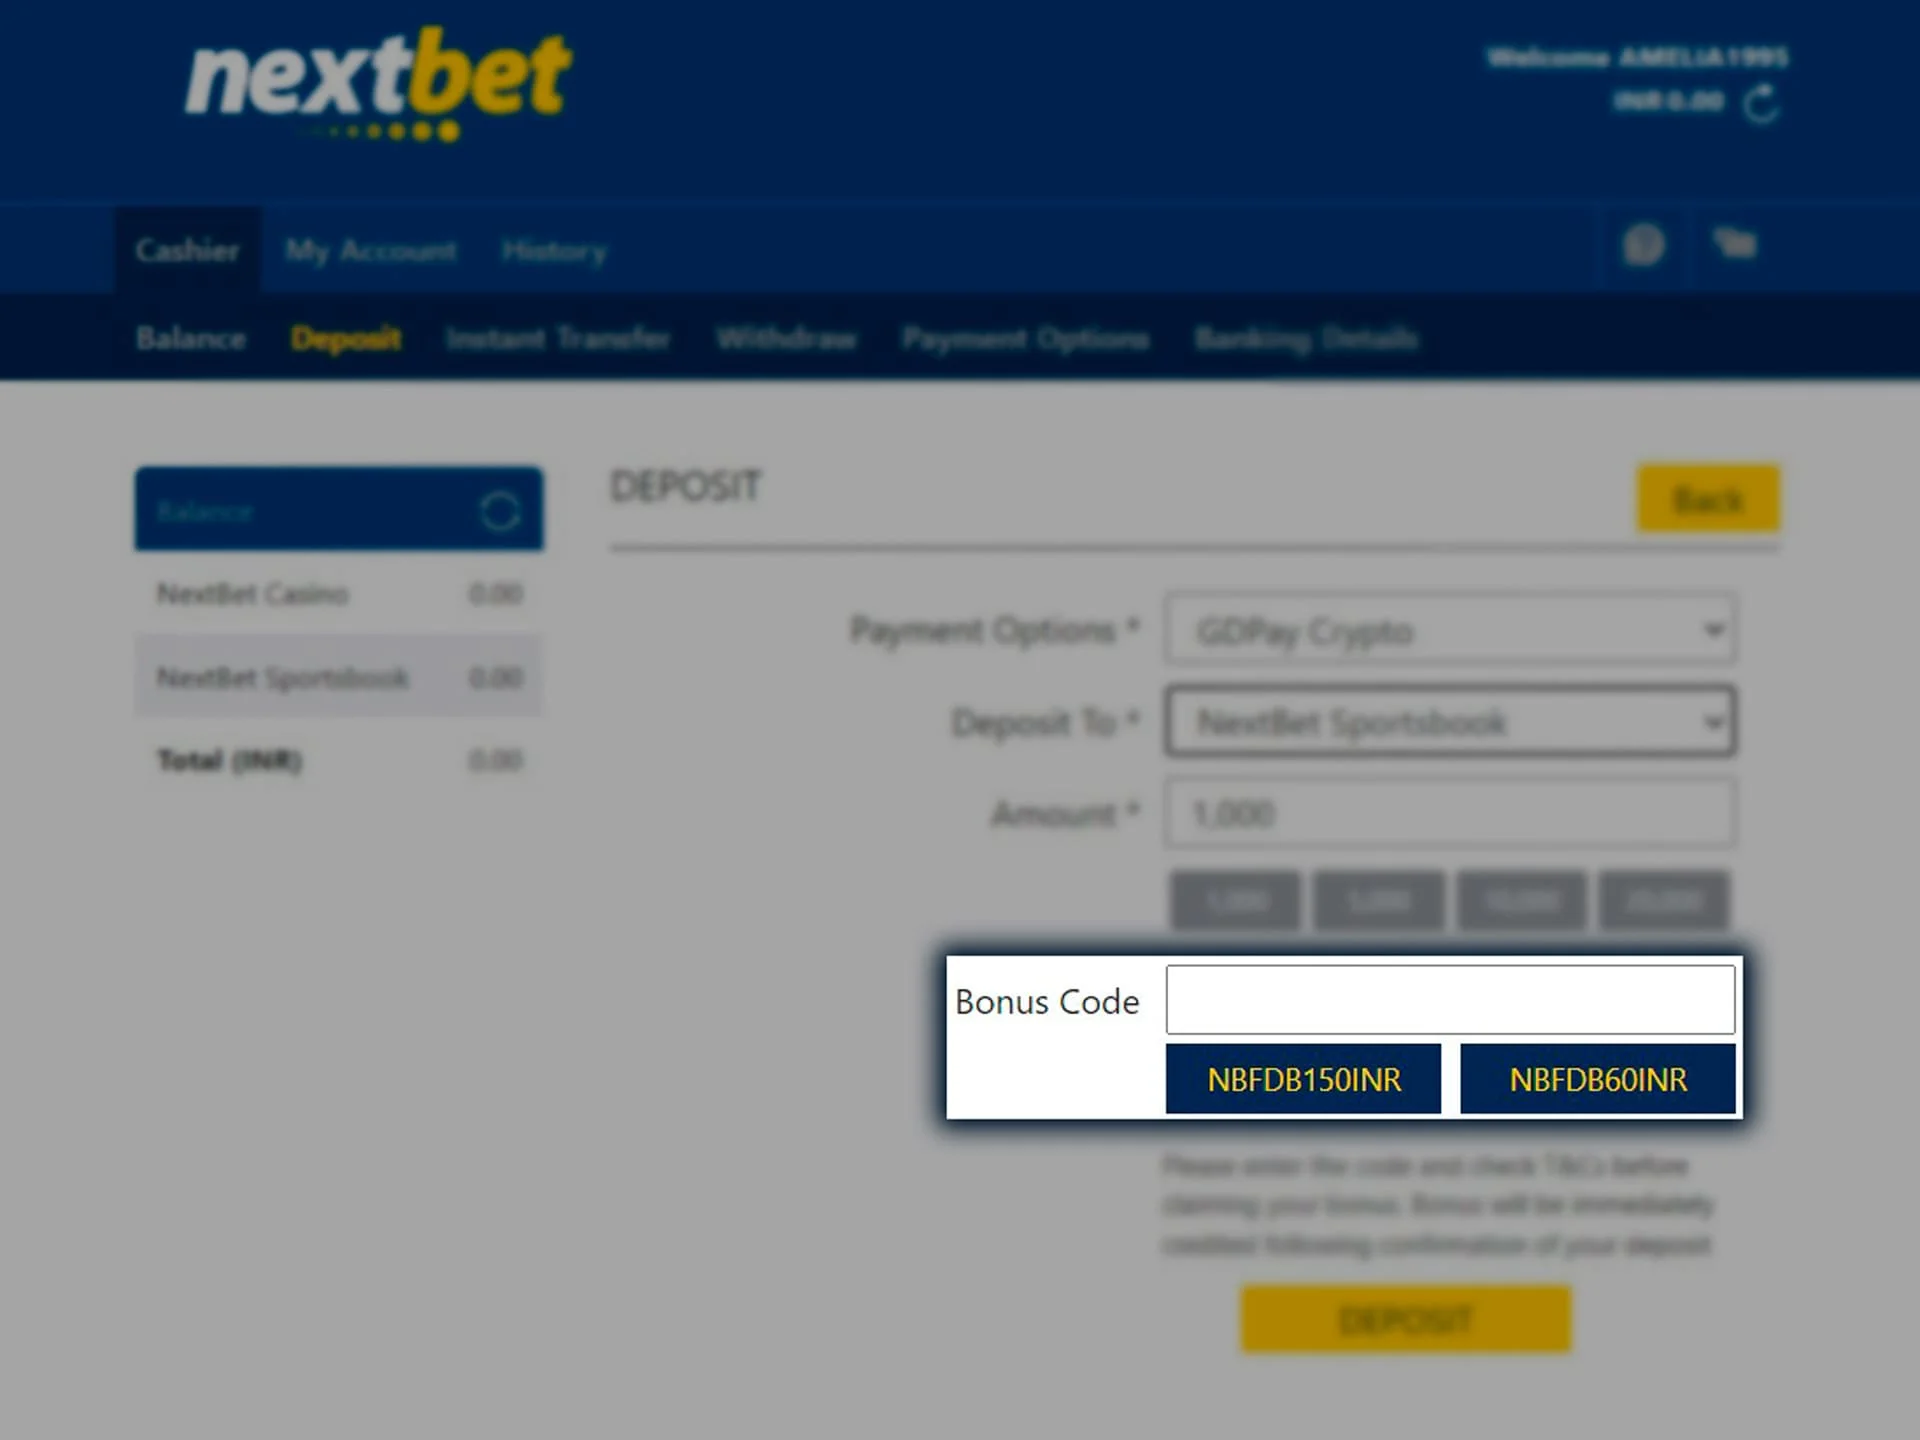 Select the Nextbet welcome bonus you would like to receive.